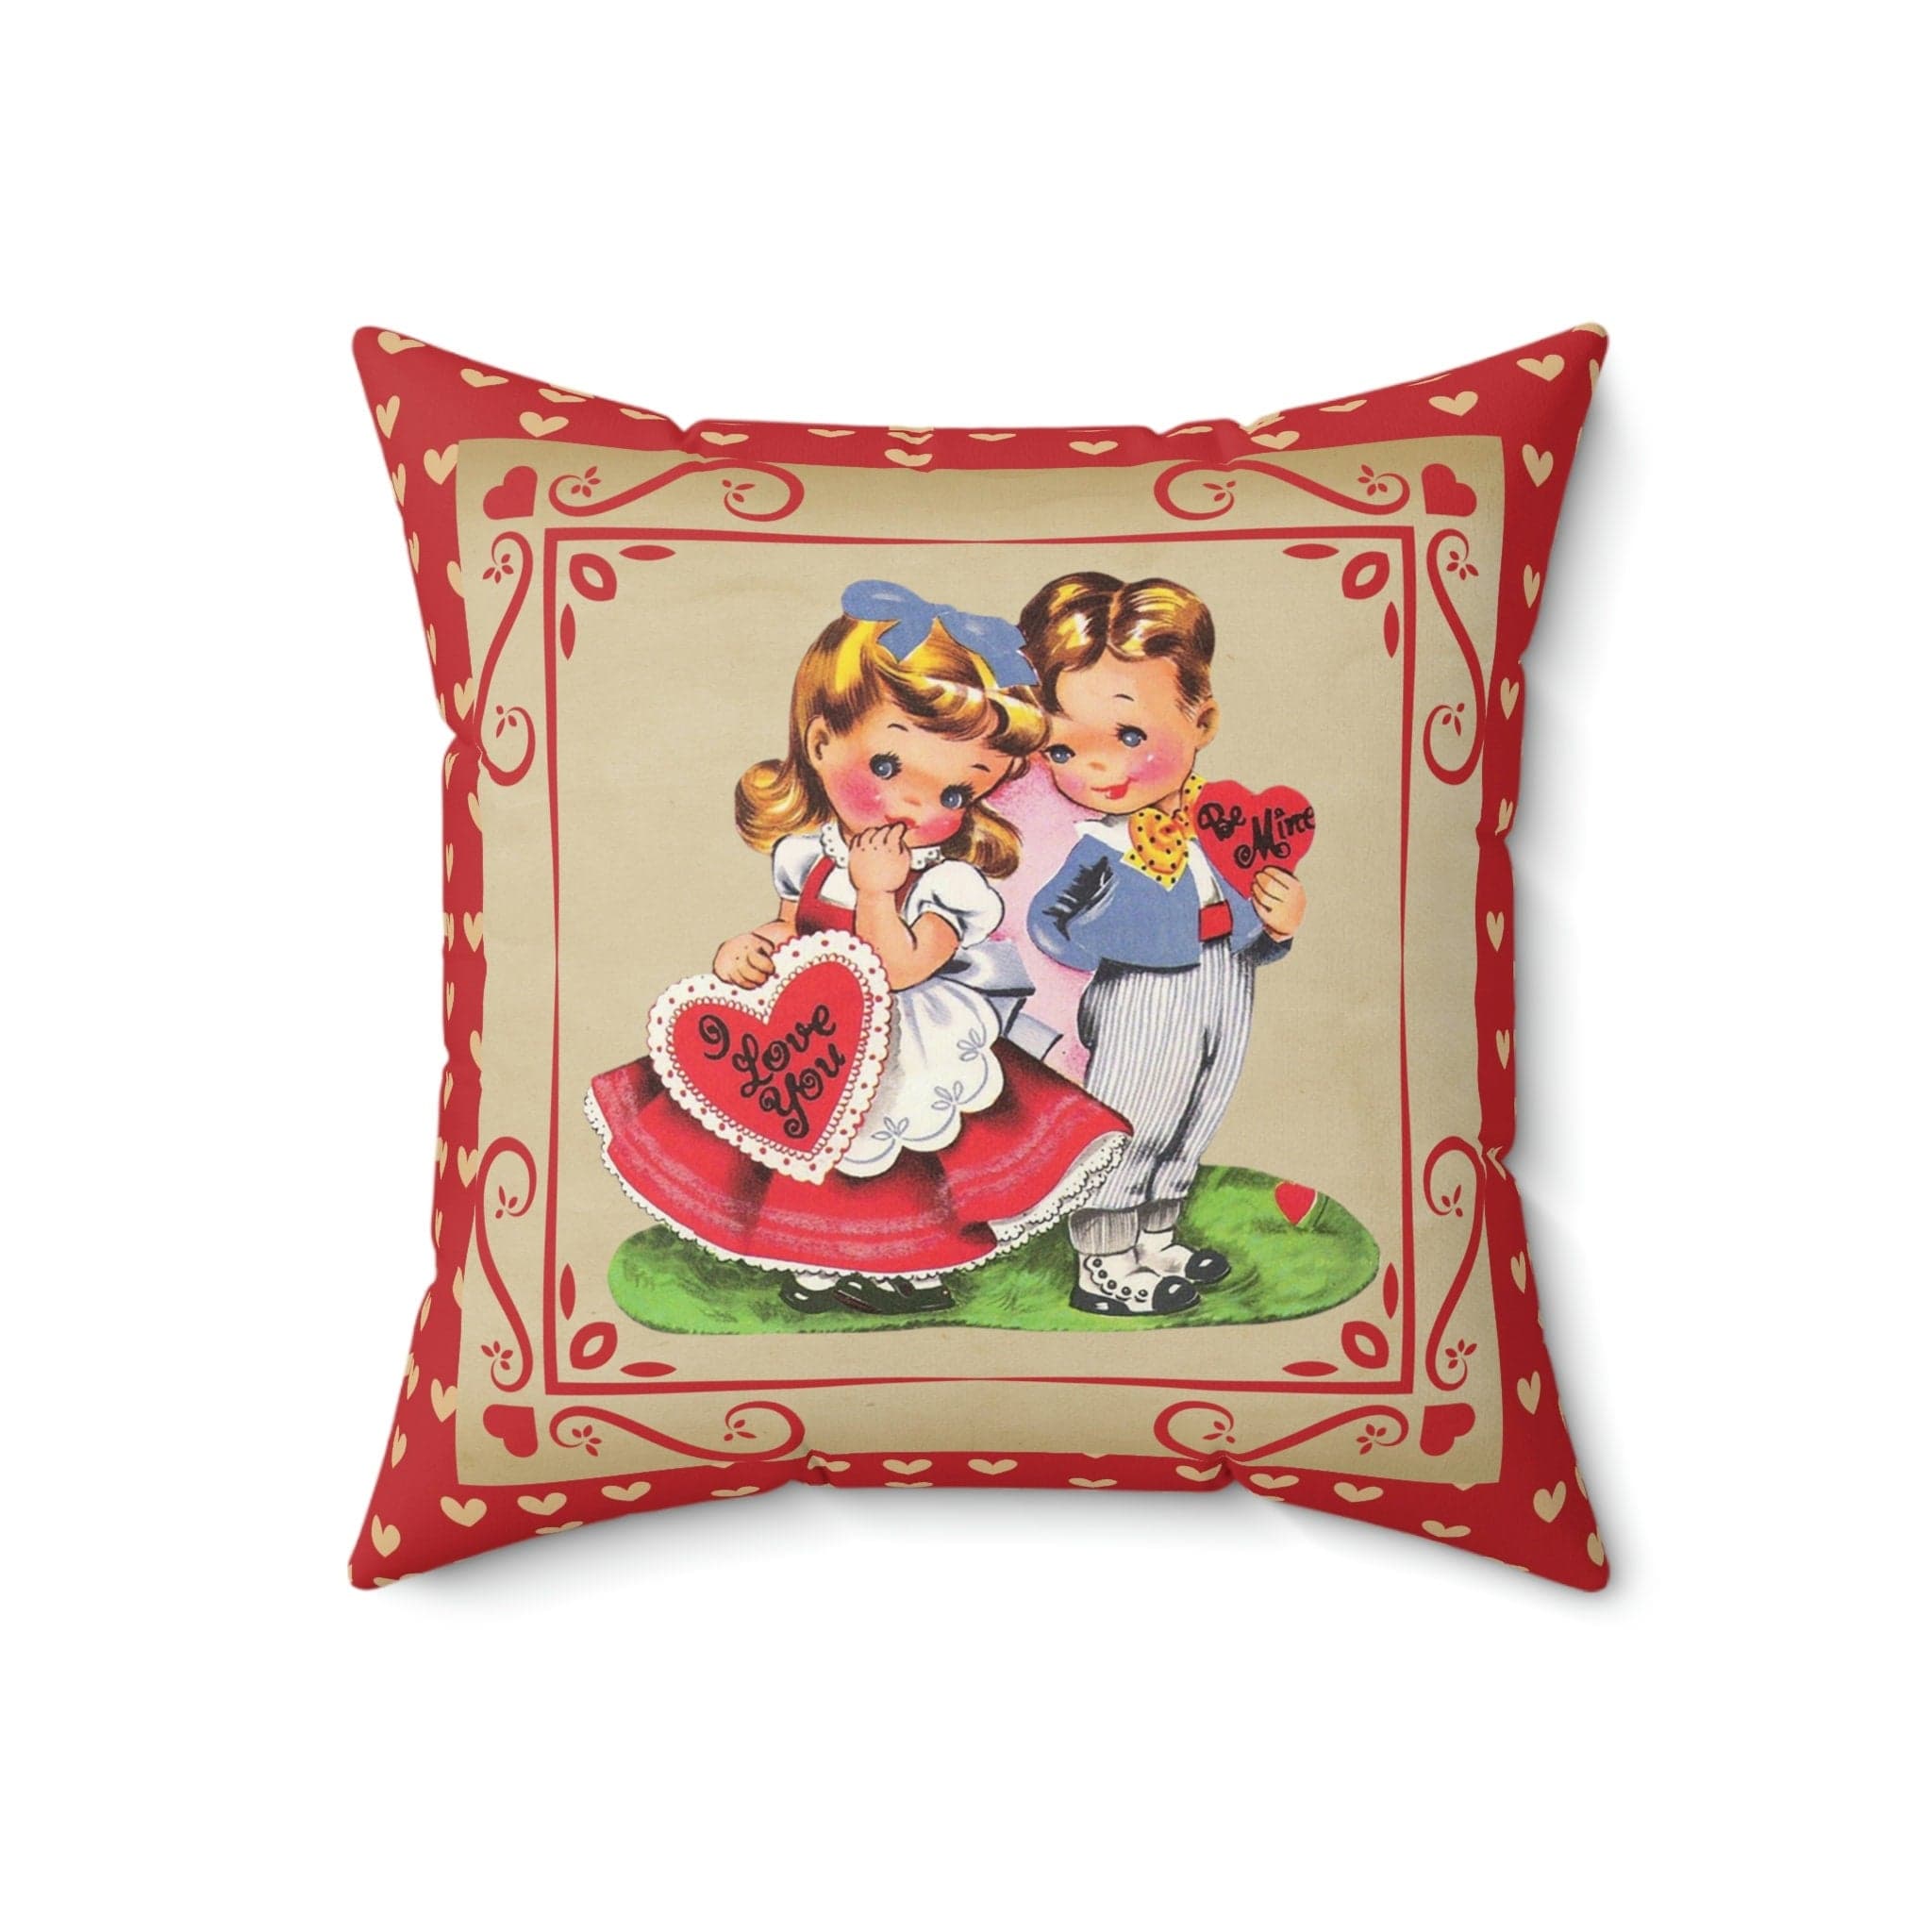 Kate McEnroe New York Vintage Valentine Boy and Girl Hearts Throw Pillow CoverThrow Pillow Covers31853400347988346088